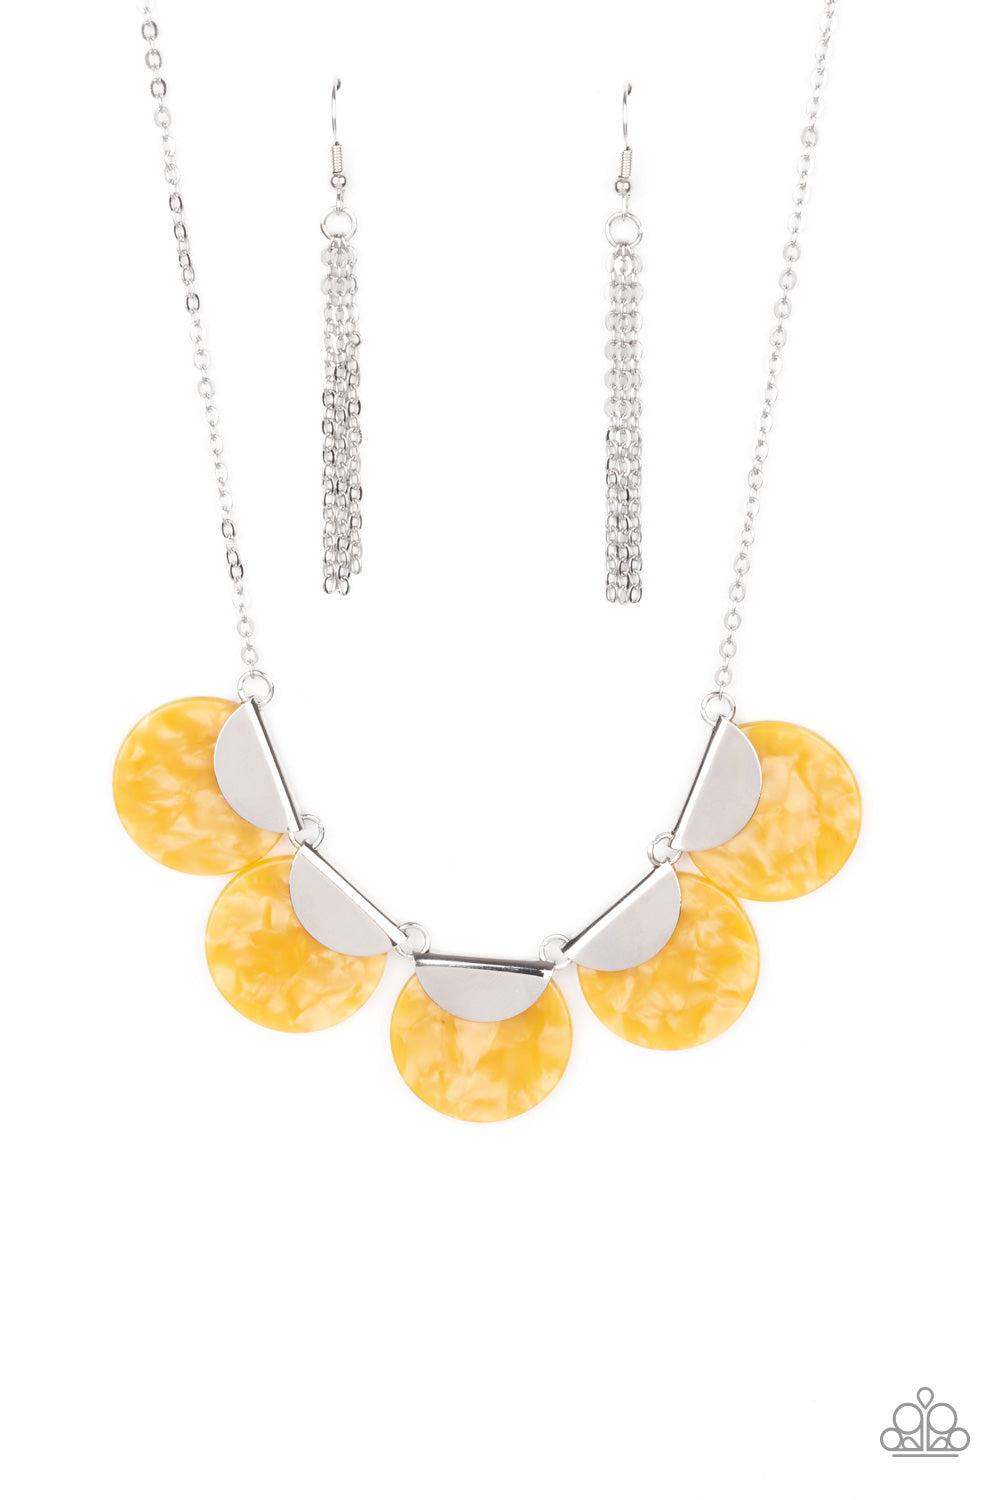 Mermaid Oasis Yellow Acrylic Necklace - Paparazzi Accessories- lightbox - CarasShop.com - $5 Jewelry by Cara Jewels